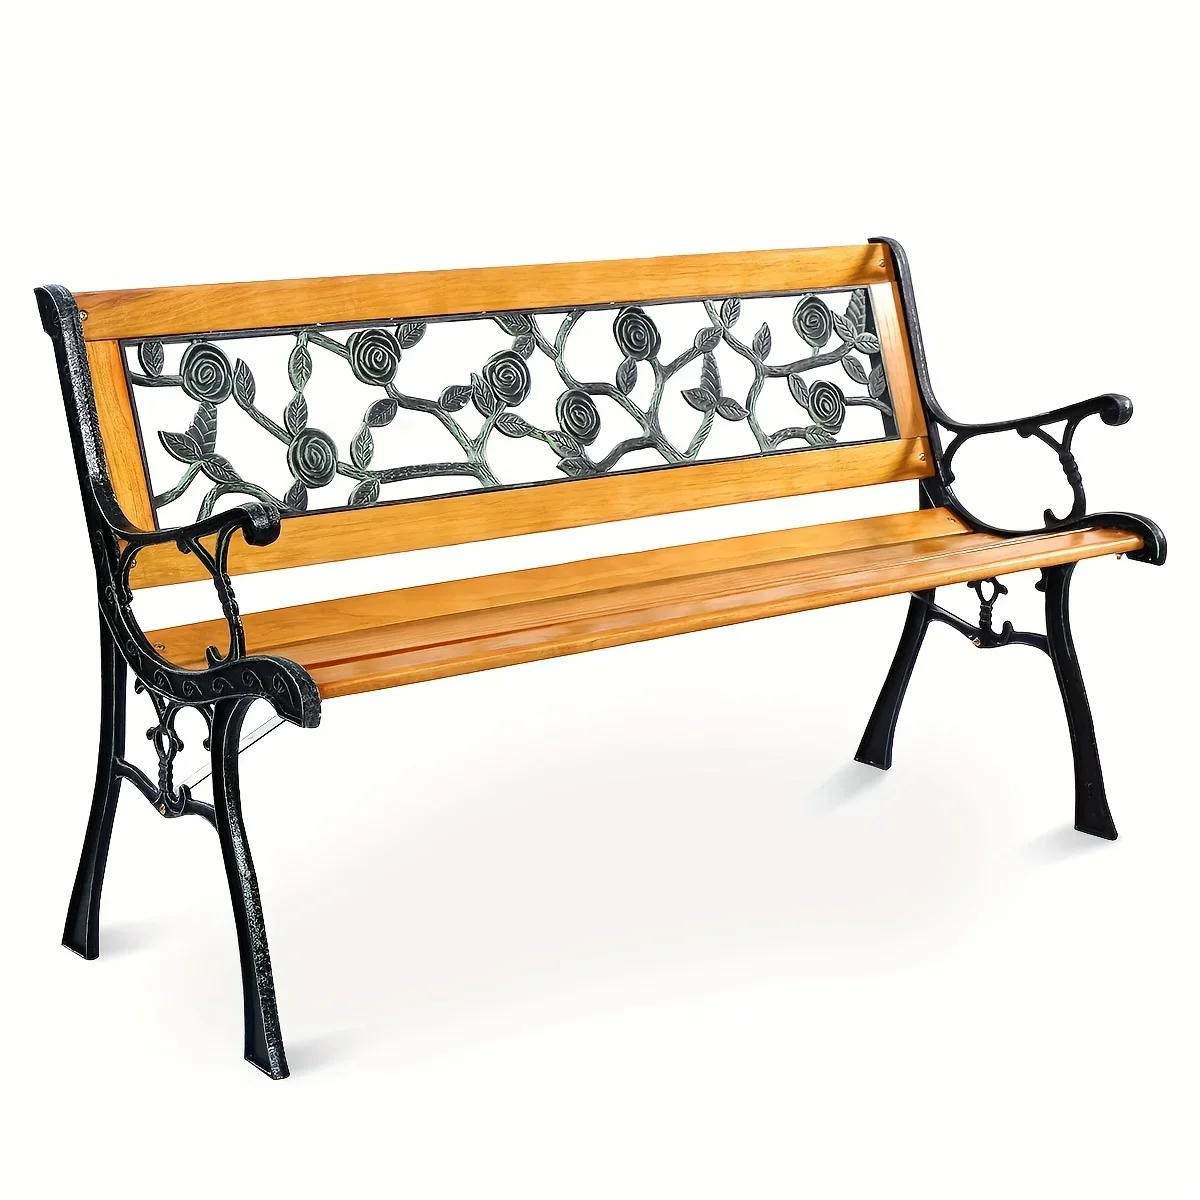 

Comfortable and Stylish 49 1/2" Patio Park Garden Porch Chair Bench for Relaxing Outdoors or Entertaining Guests